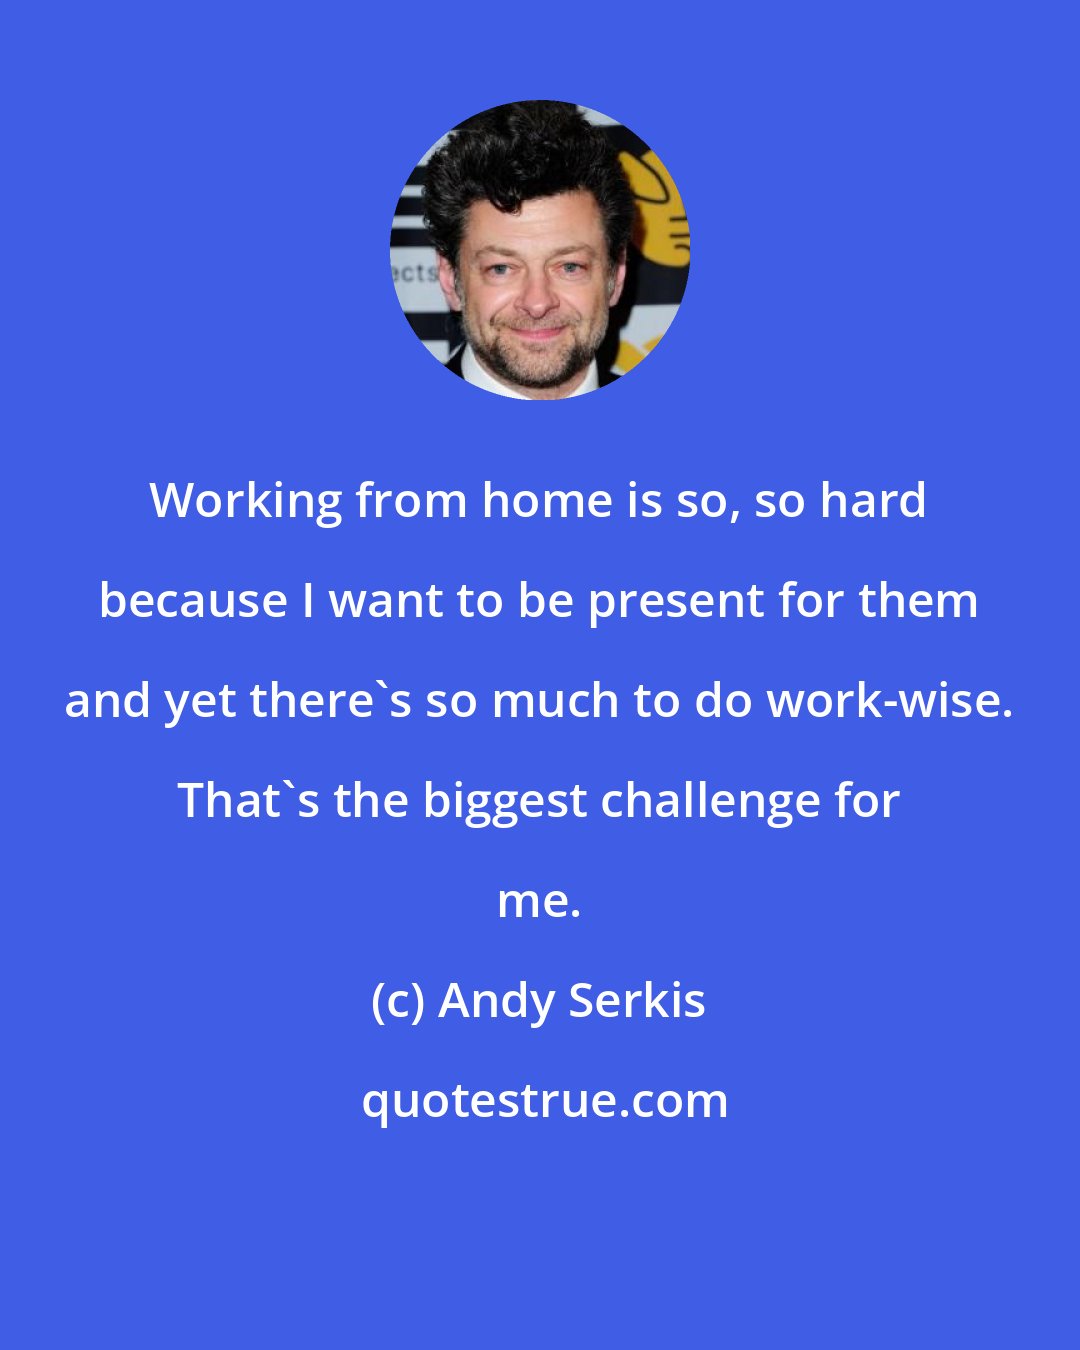 Andy Serkis: Working from home is so, so hard because I want to be present for them and yet there's so much to do work-wise. That's the biggest challenge for me.